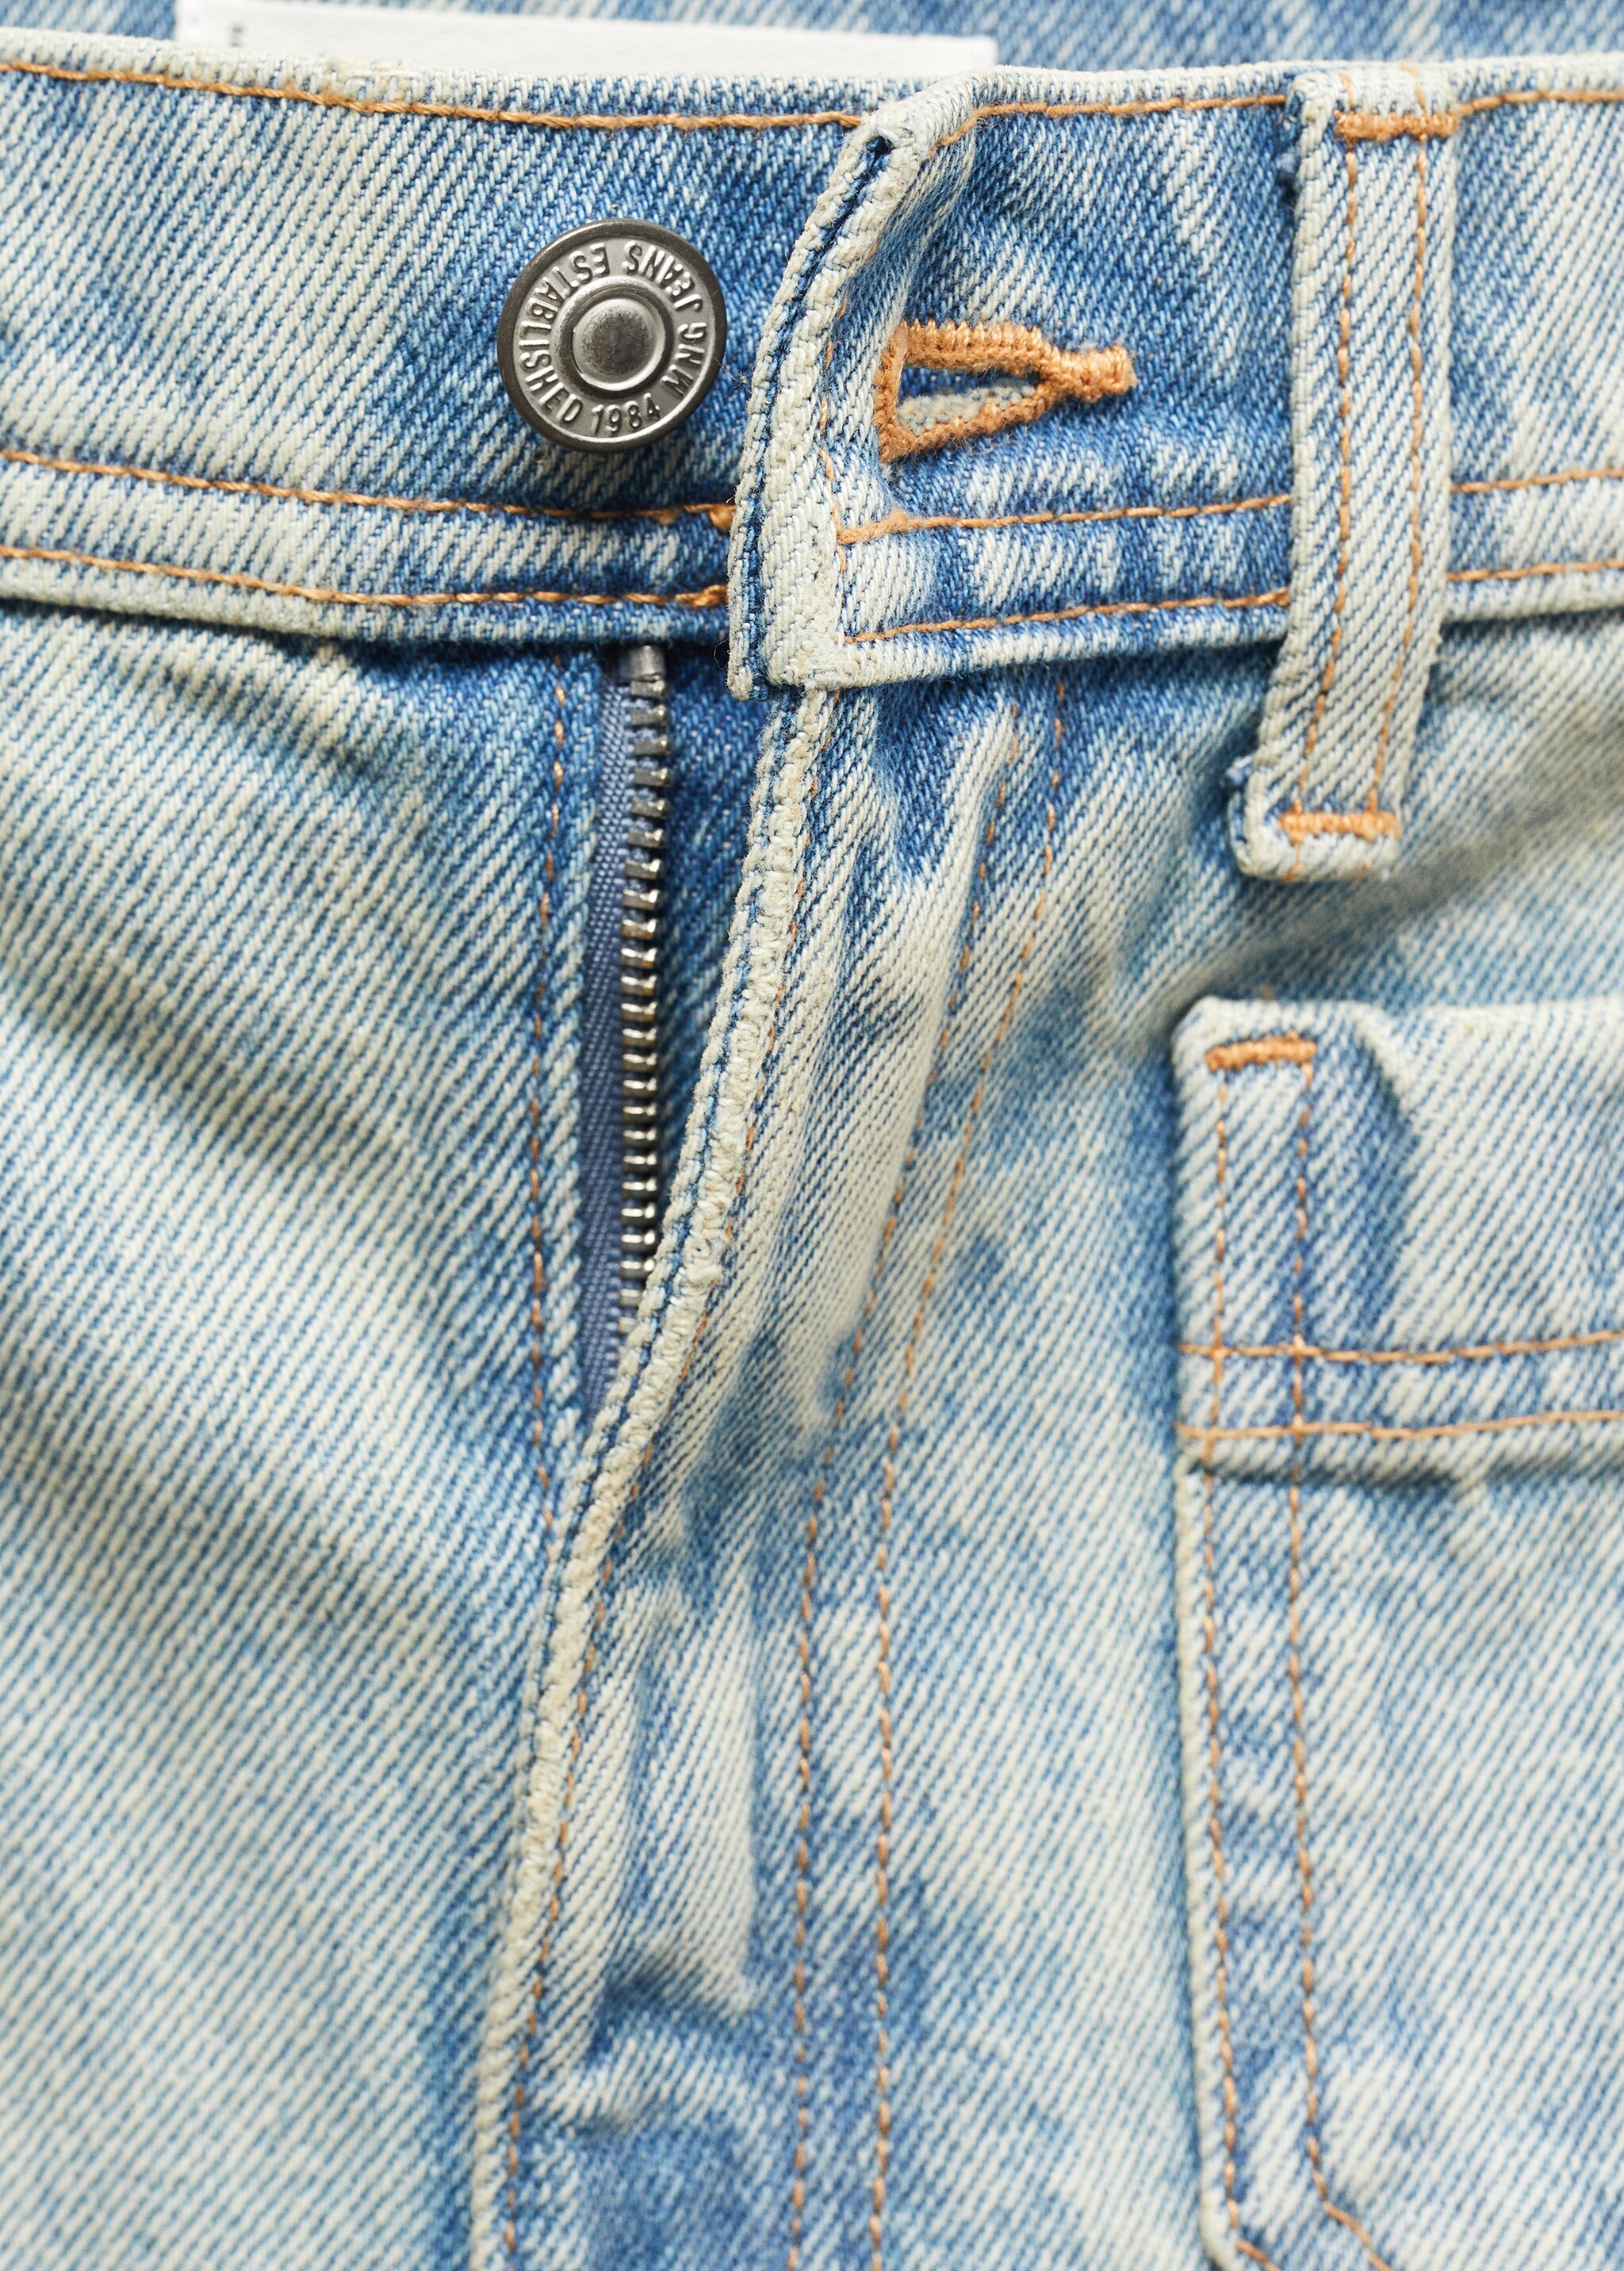 Wideleg jeans with pockets - Details of the article 8